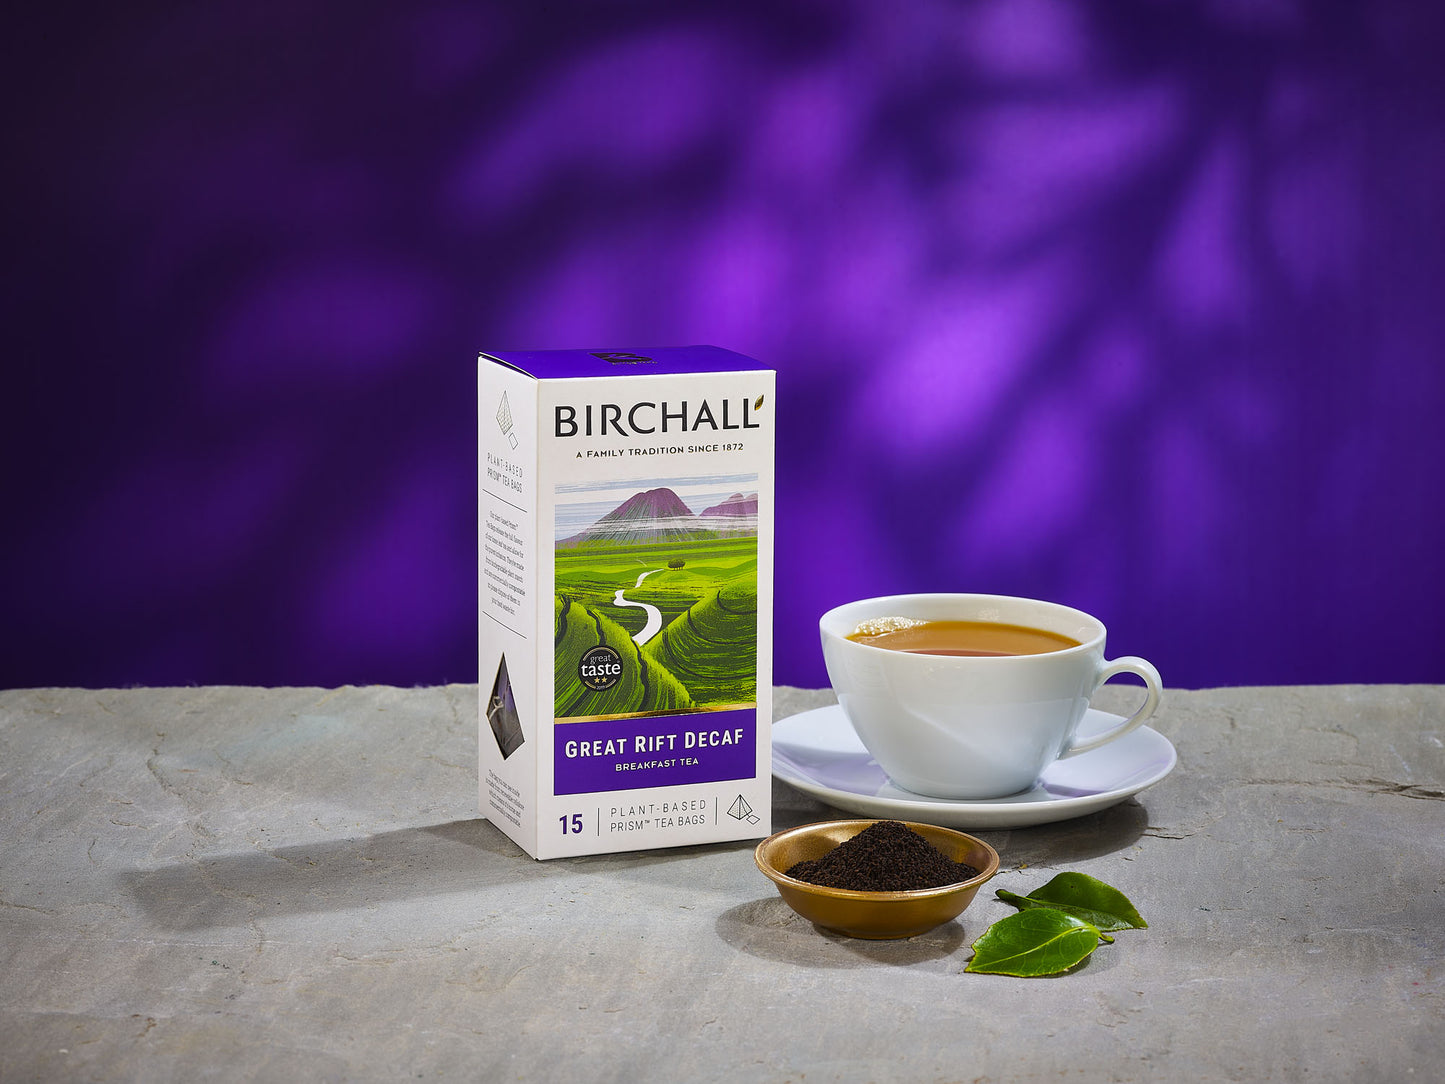 Birchall Great Rift Decaf - 15 Plant-Based Prism Tea Bags